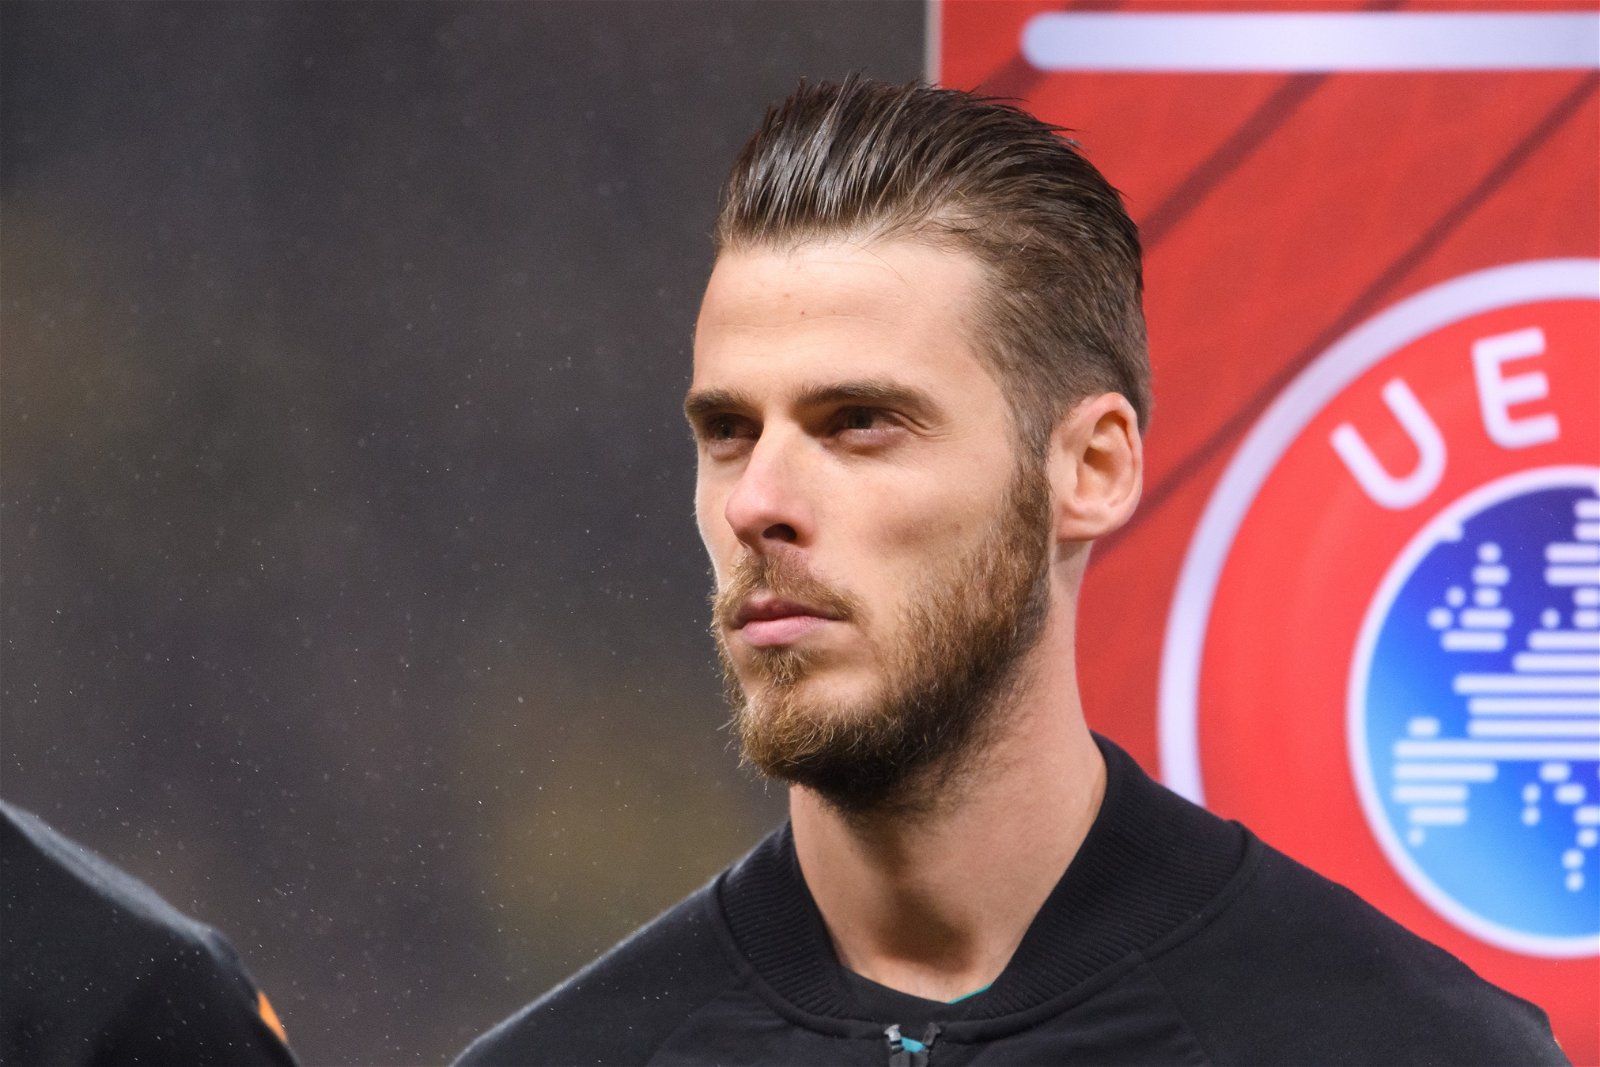 David de Gea misses out on nomination on first-ever Yachine Trophy